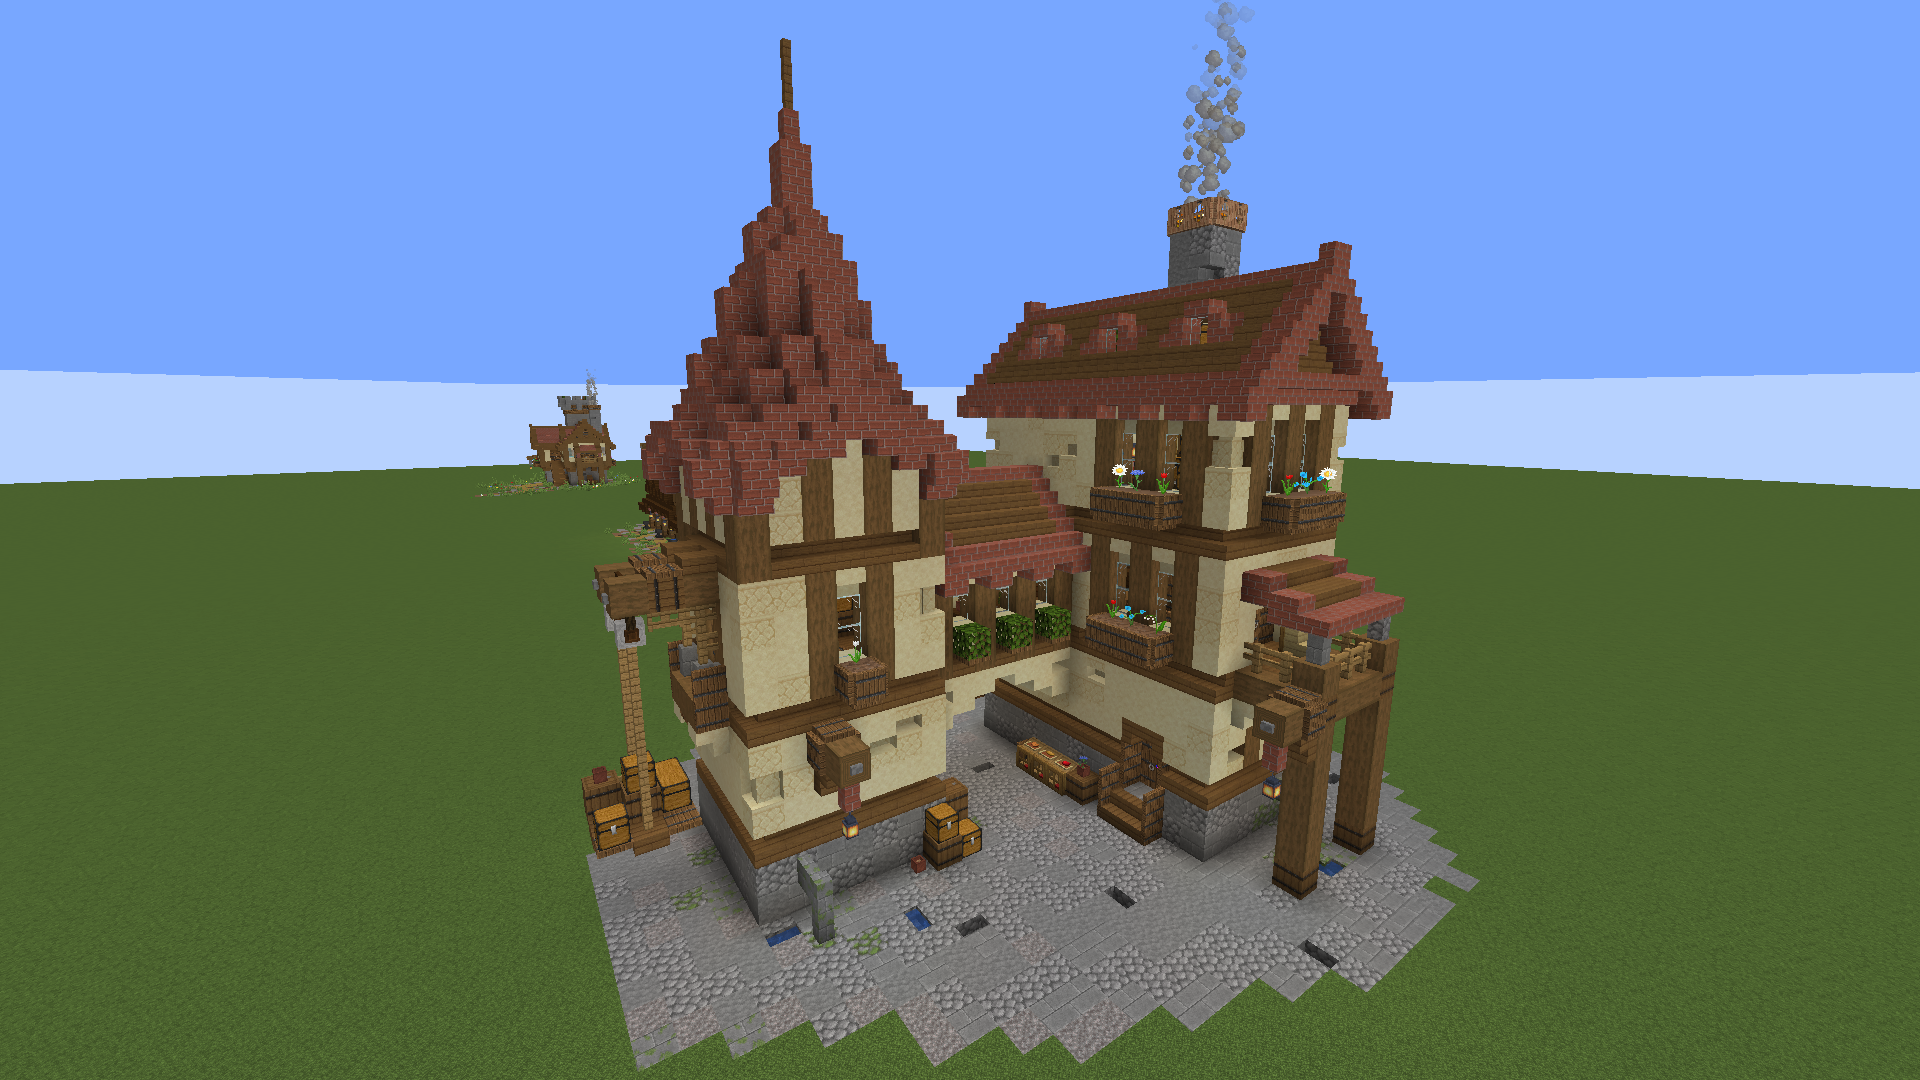 Minecract Sandstone and Brick House with Interior  schematic (litematic)